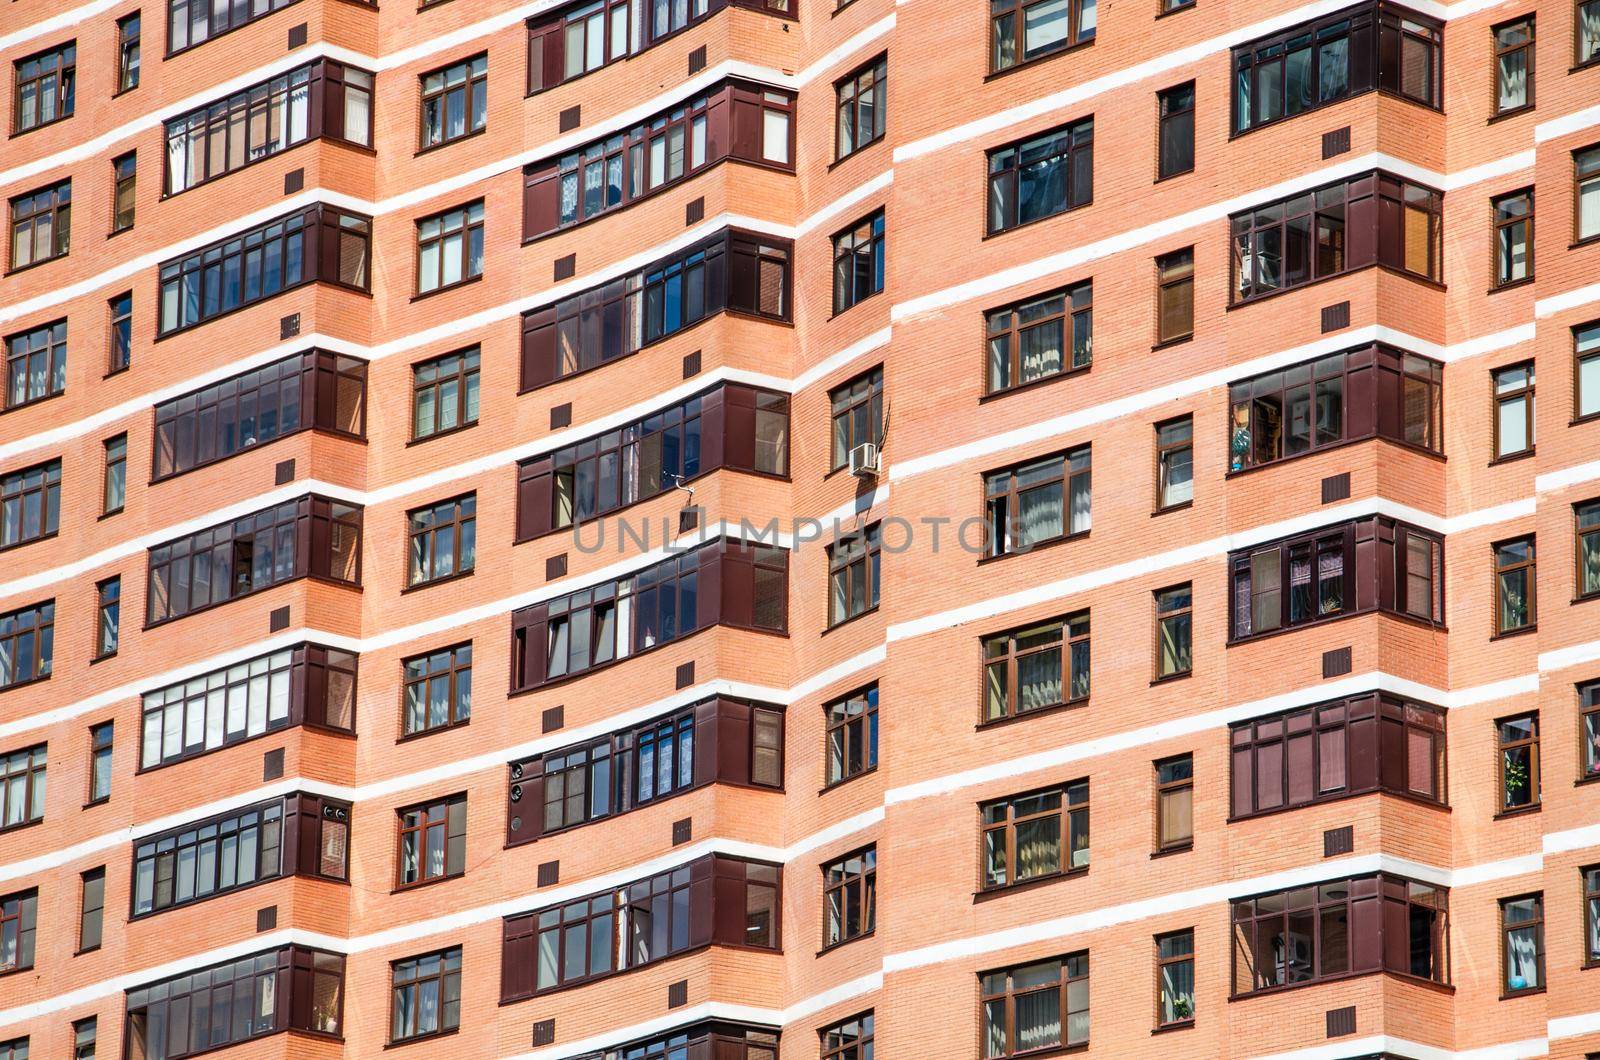 View of brick wall red contemporary apartment building with windows and balconies closeup.